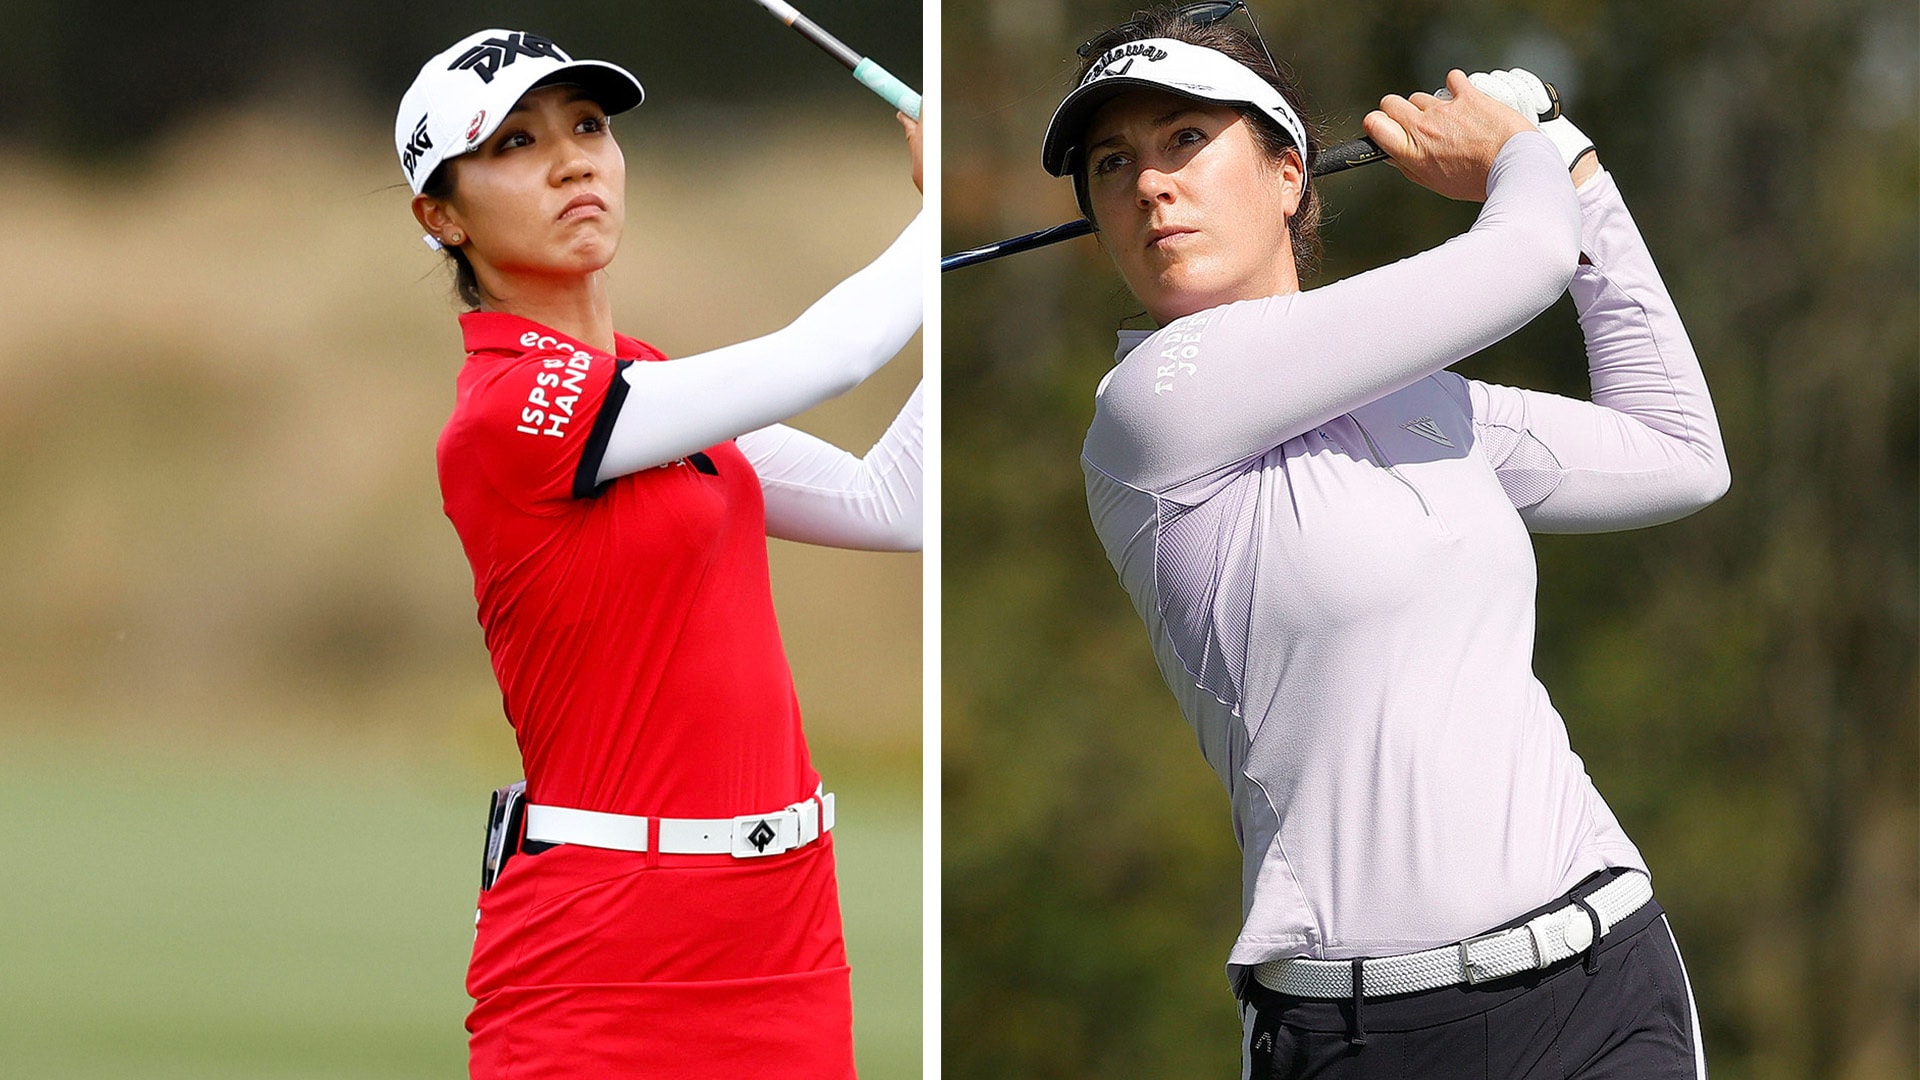 Rolex Rankings movement: Who in the women’s game rose, fell in 2021